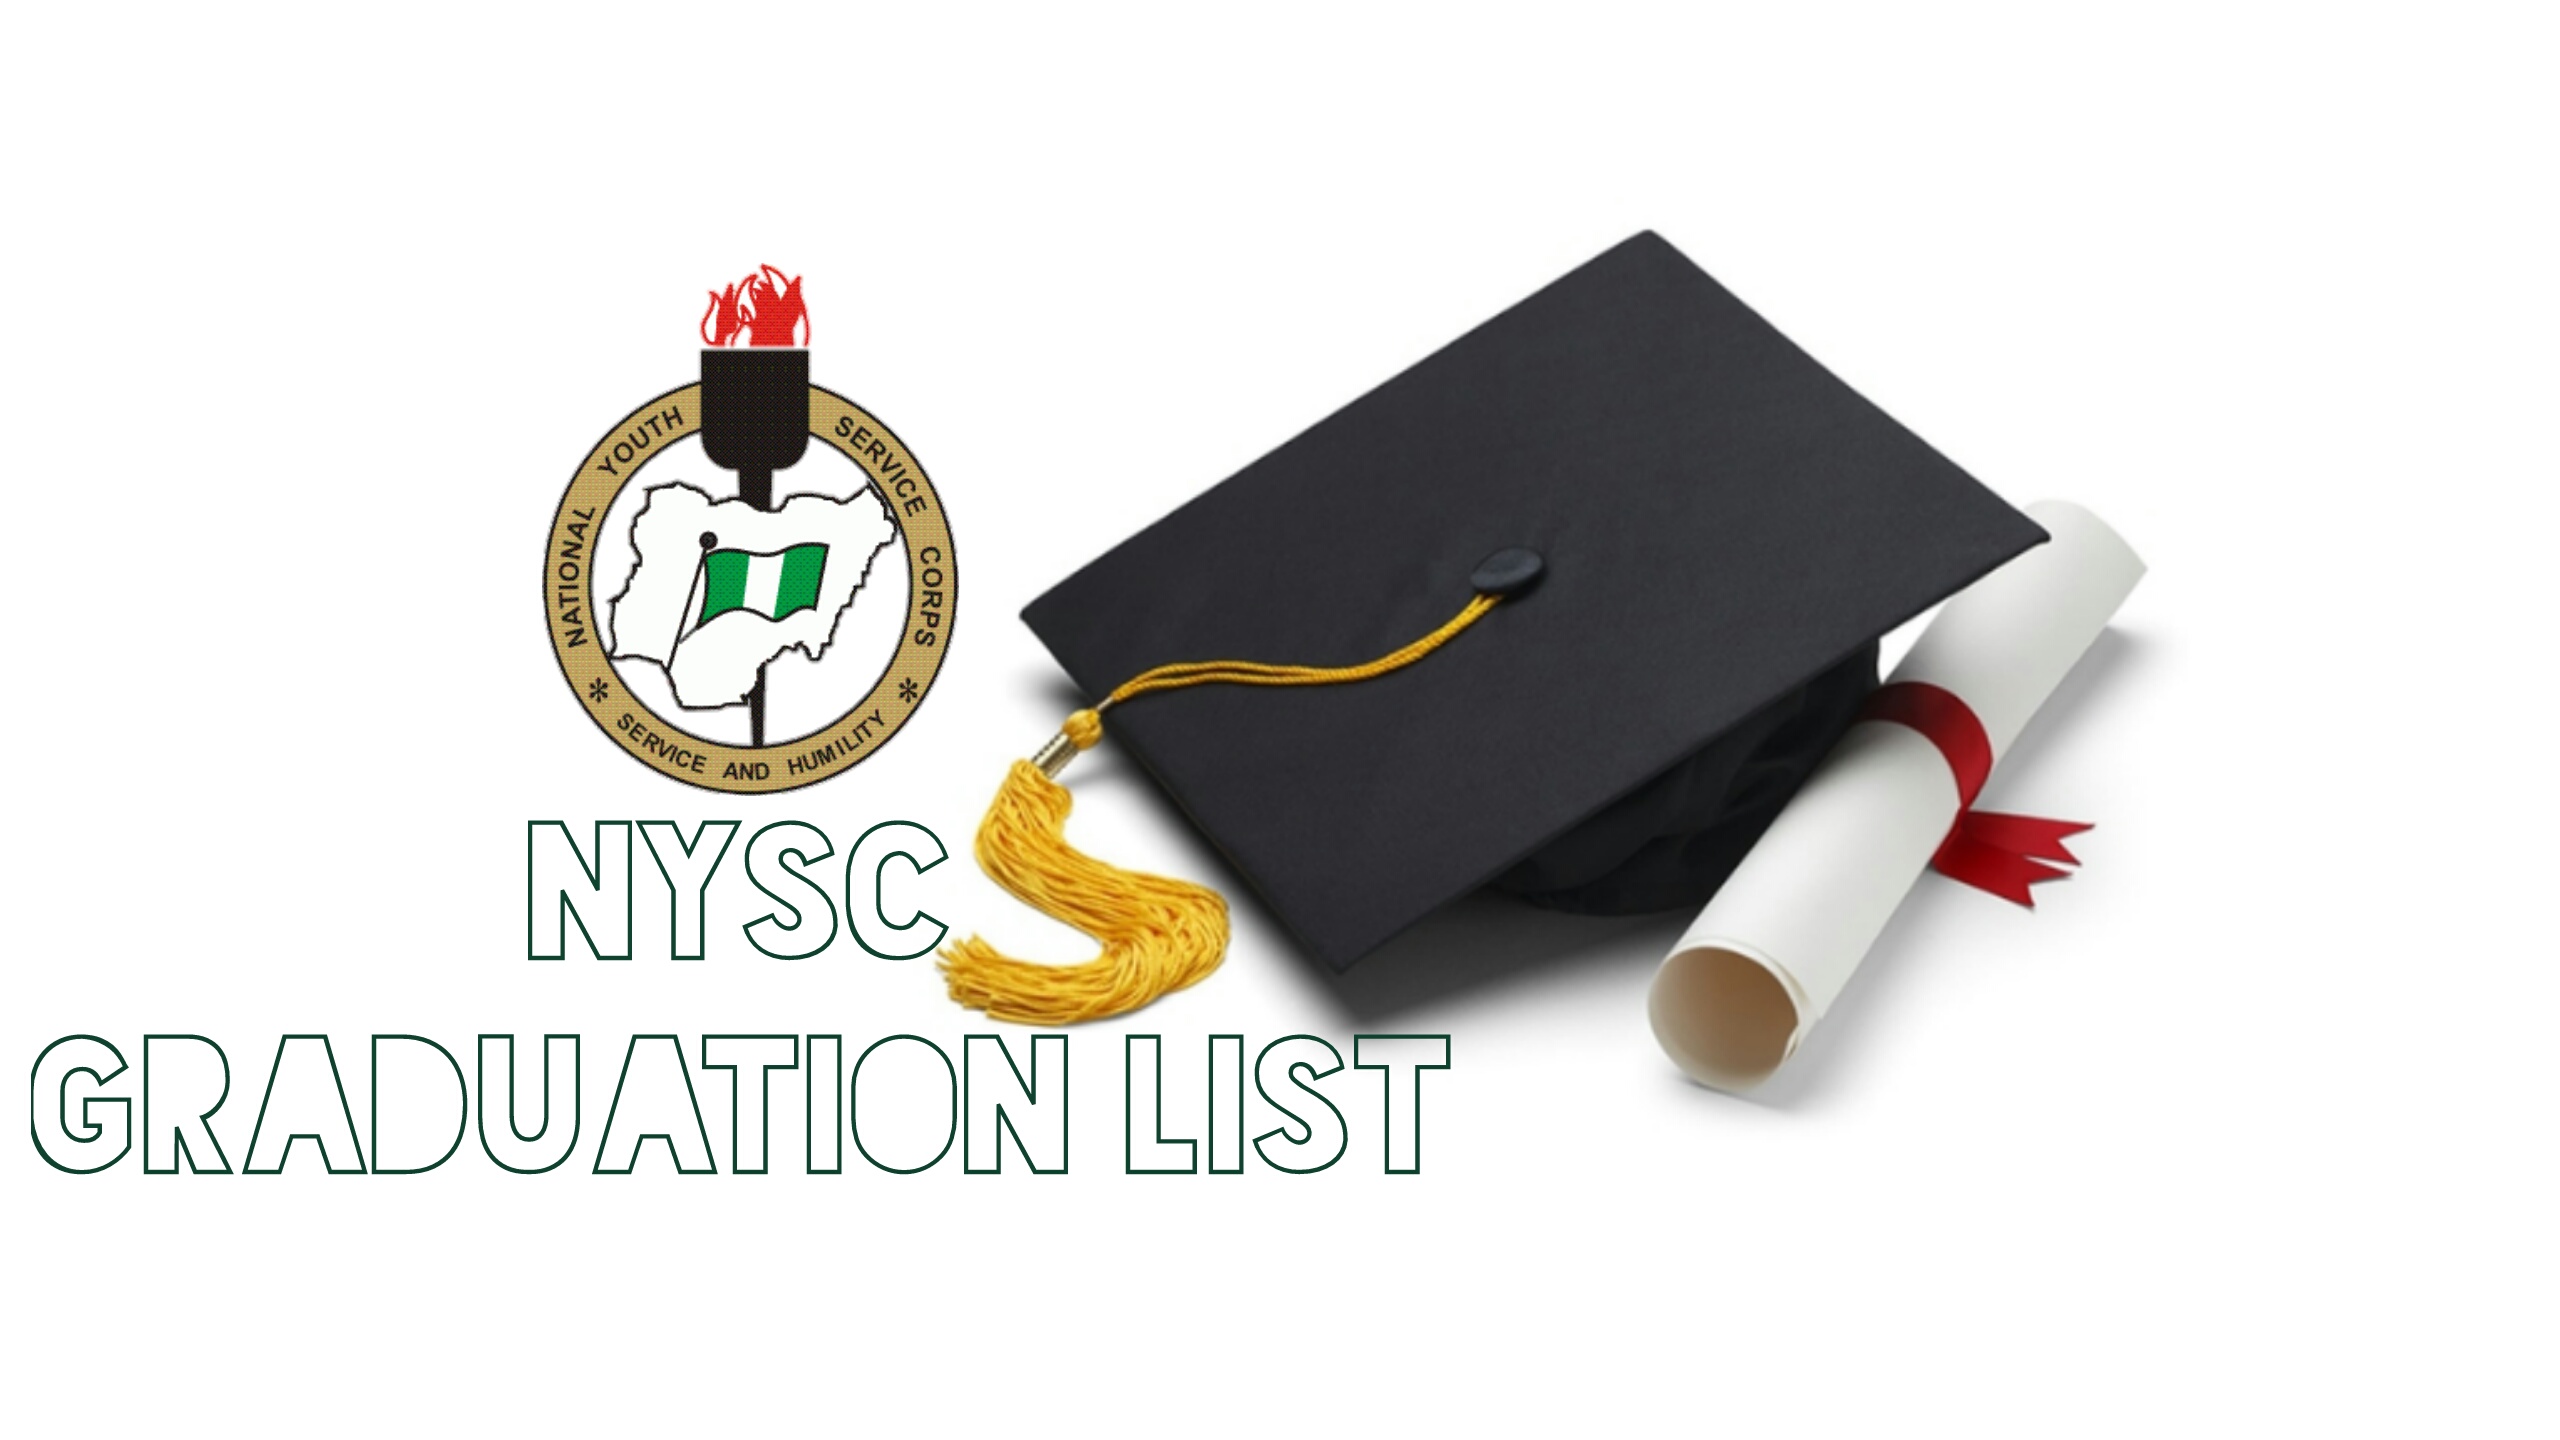 NYSC Graduation List: How to Easily Verify Your Name